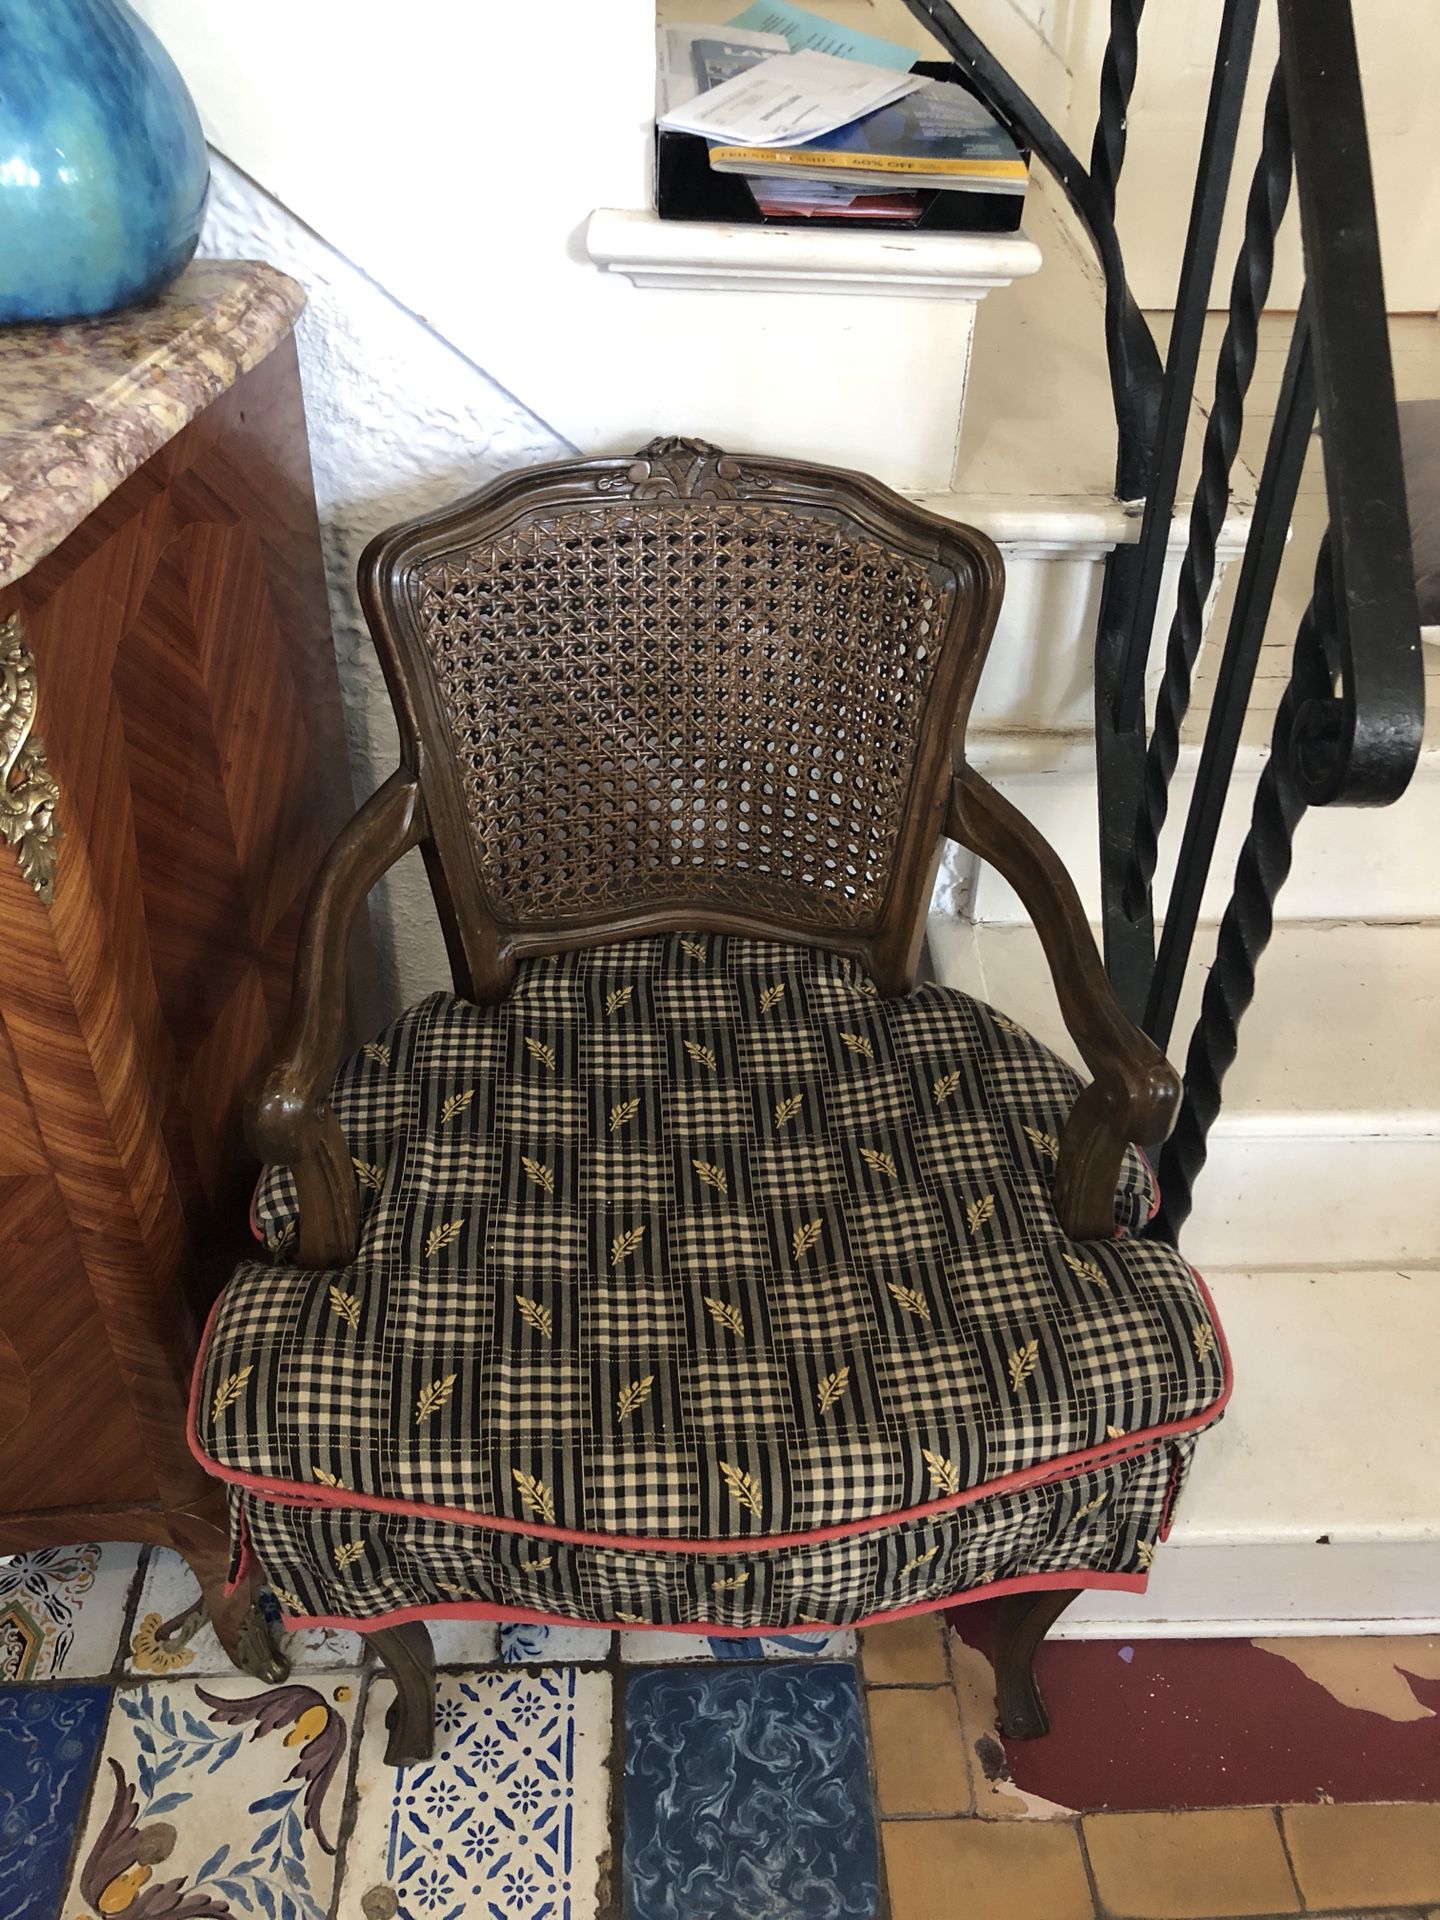 Refinished Antique Chair with Caning